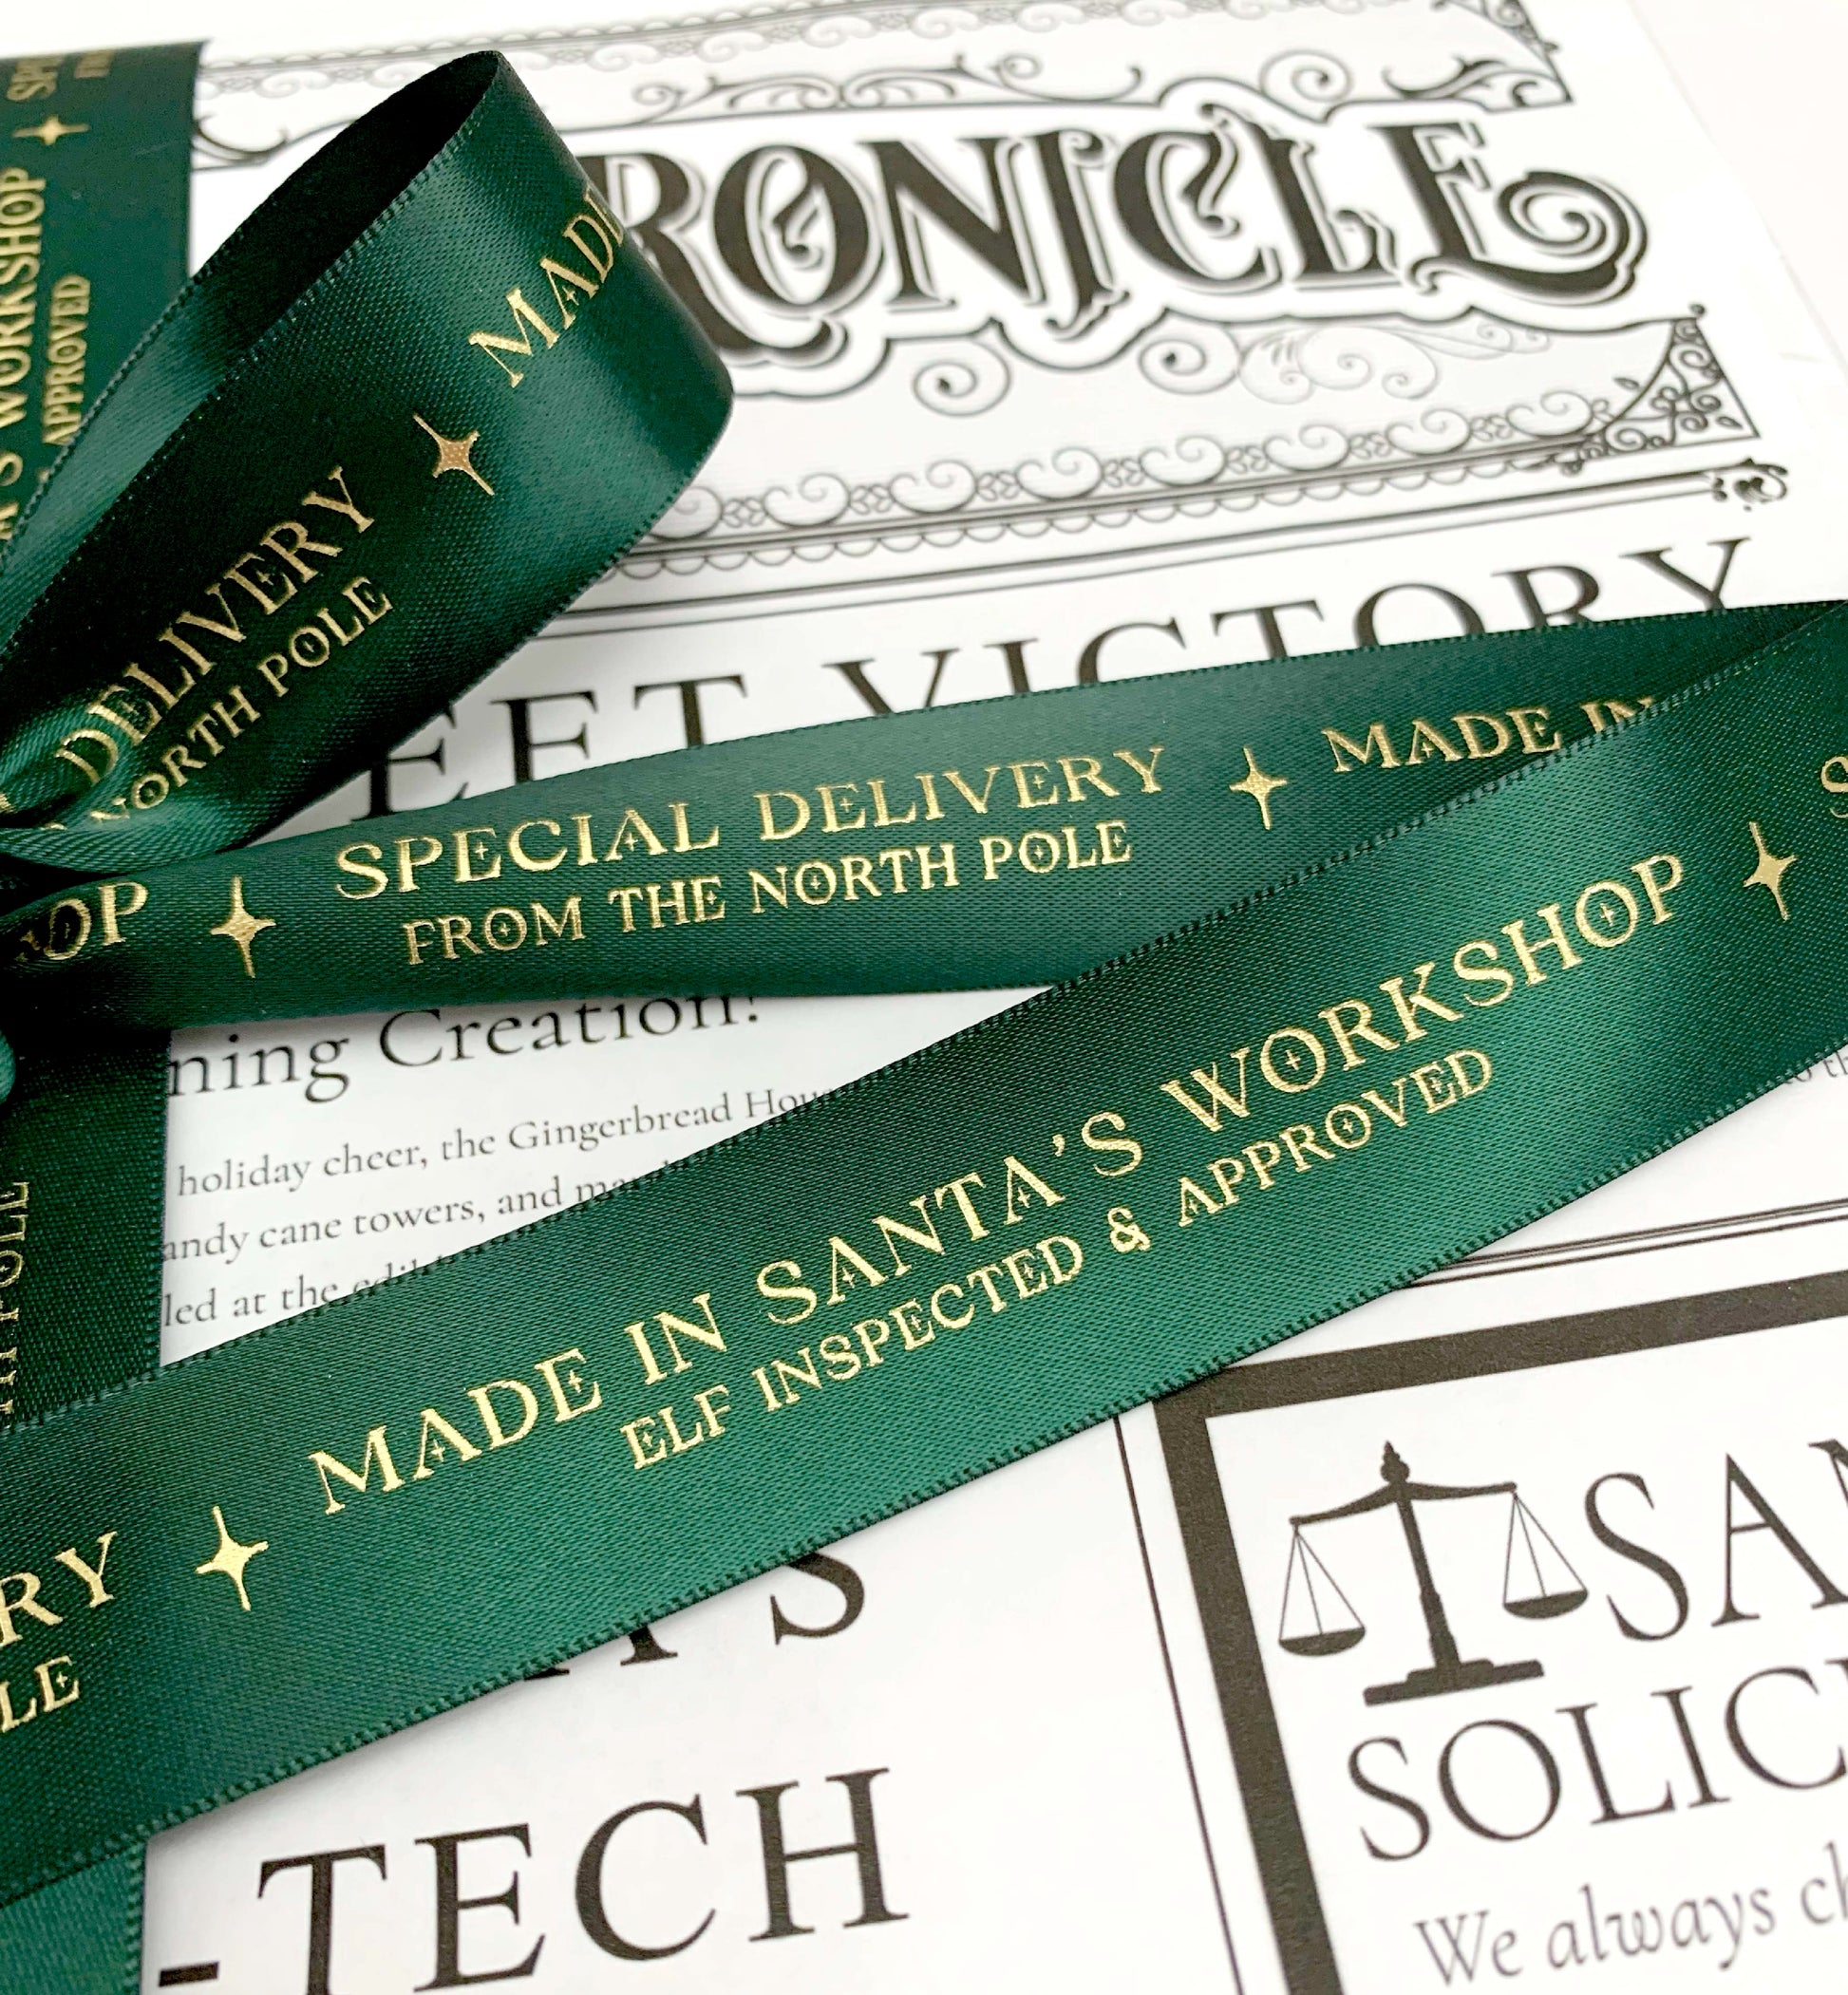 Special Delivery Made In Santa's Workshop Satin Ribbon, Green Gold, 25mm Woven Edge Satin Ribbon, Christmas Decorations Craft & Wrapping